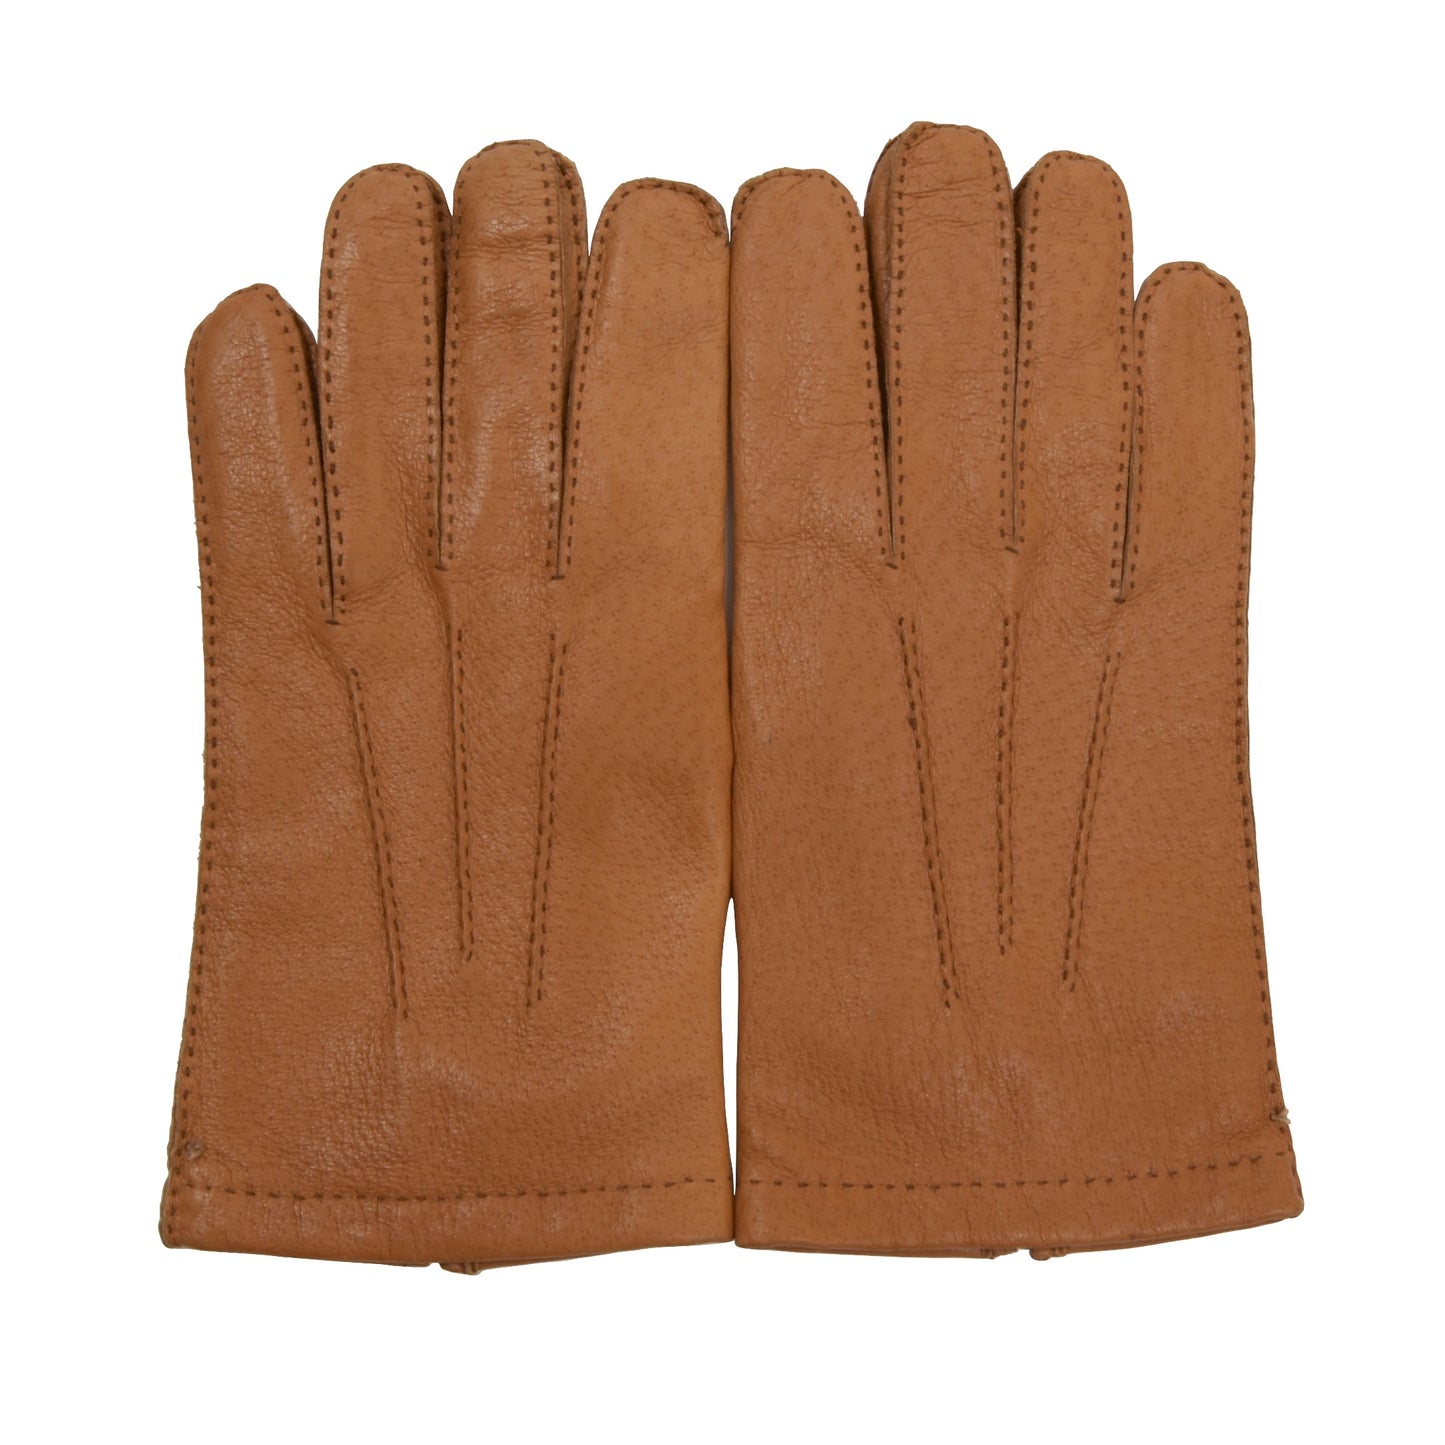 Classic Leather Gloves Size 9.5 - Tan